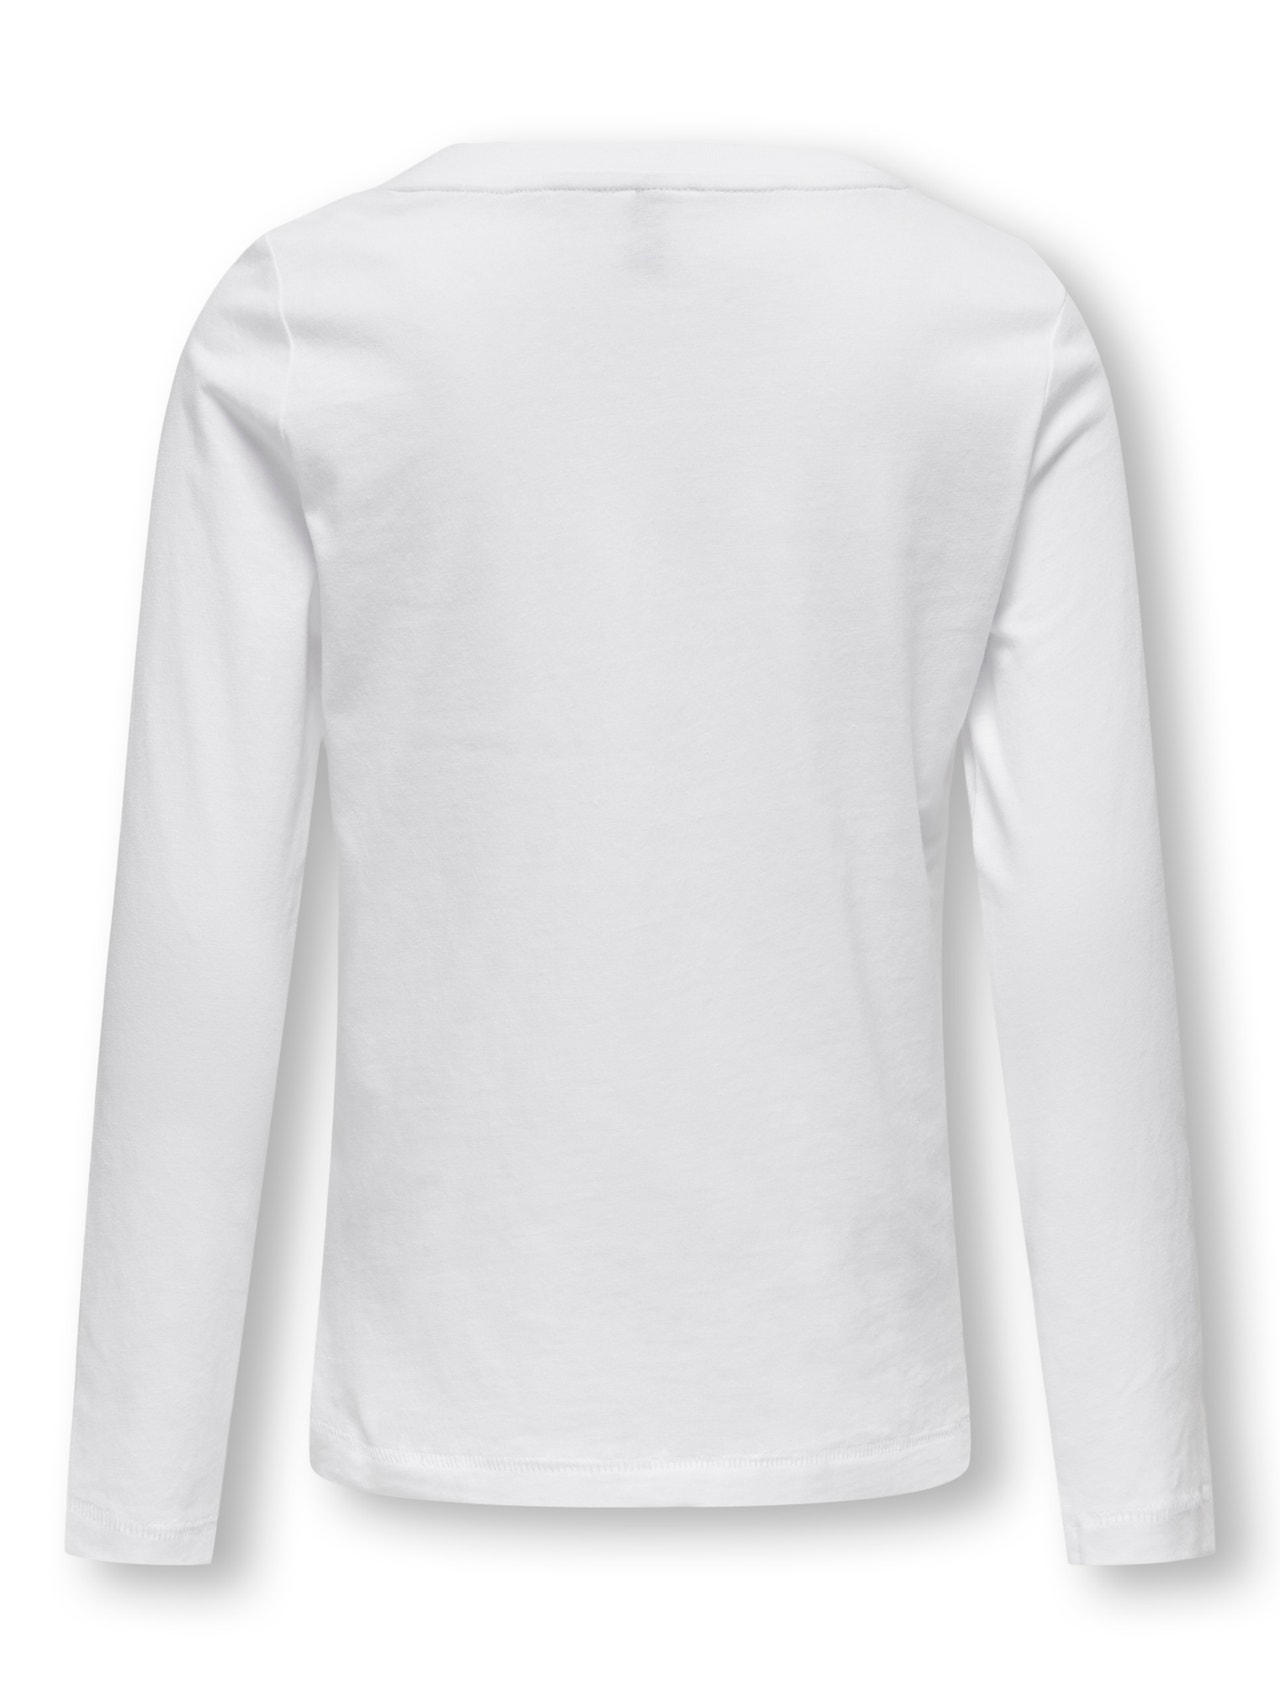 ONLY Relaxed Fit Round Neck T-Shirt -Bright White - 15306814